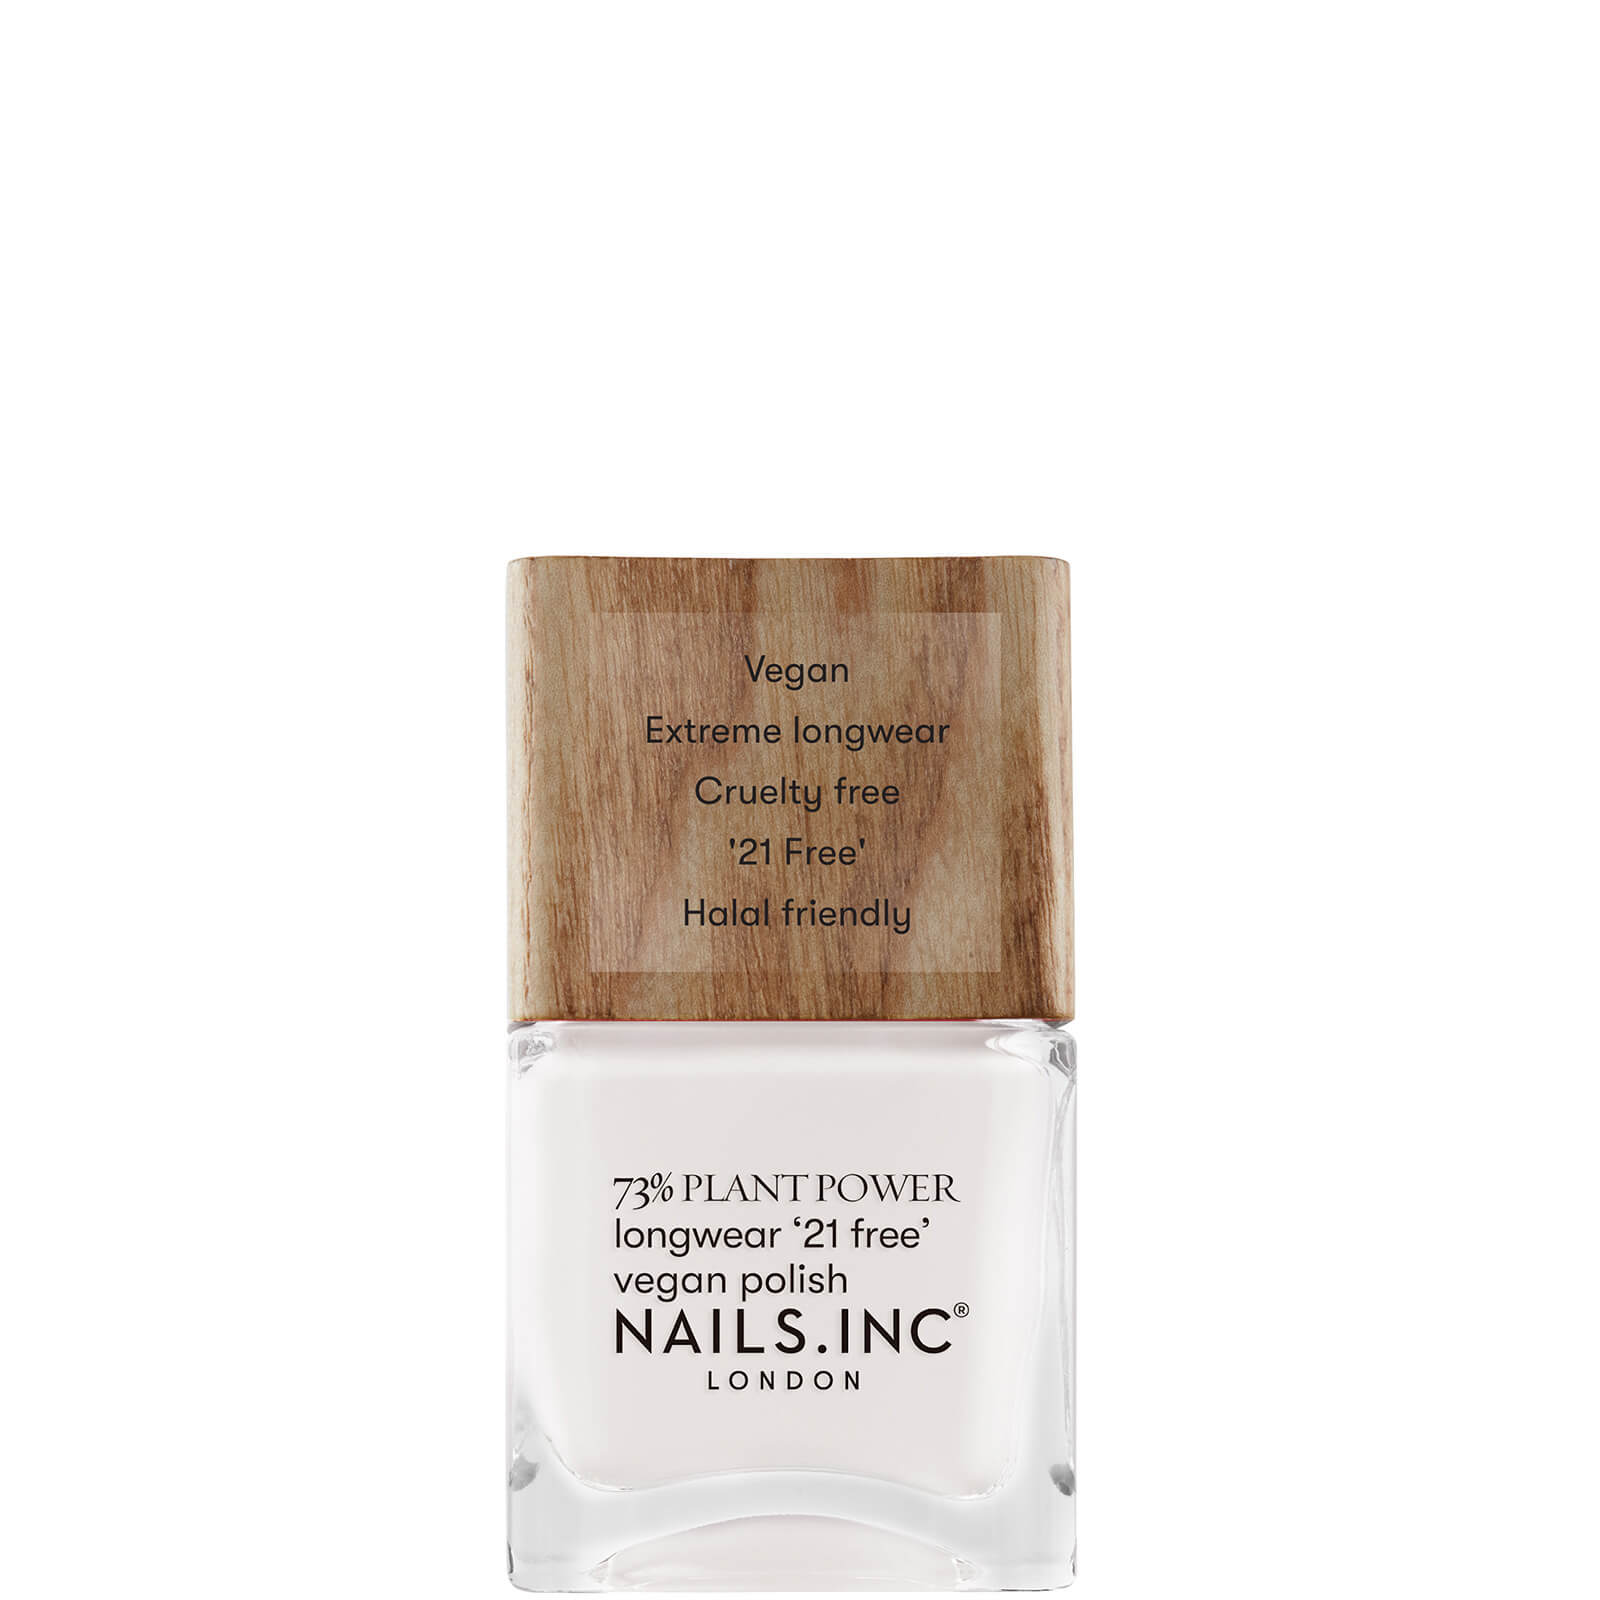 Nails inc. 73% Plant Power Nail Varnish - Free Time is Me Time 14ml